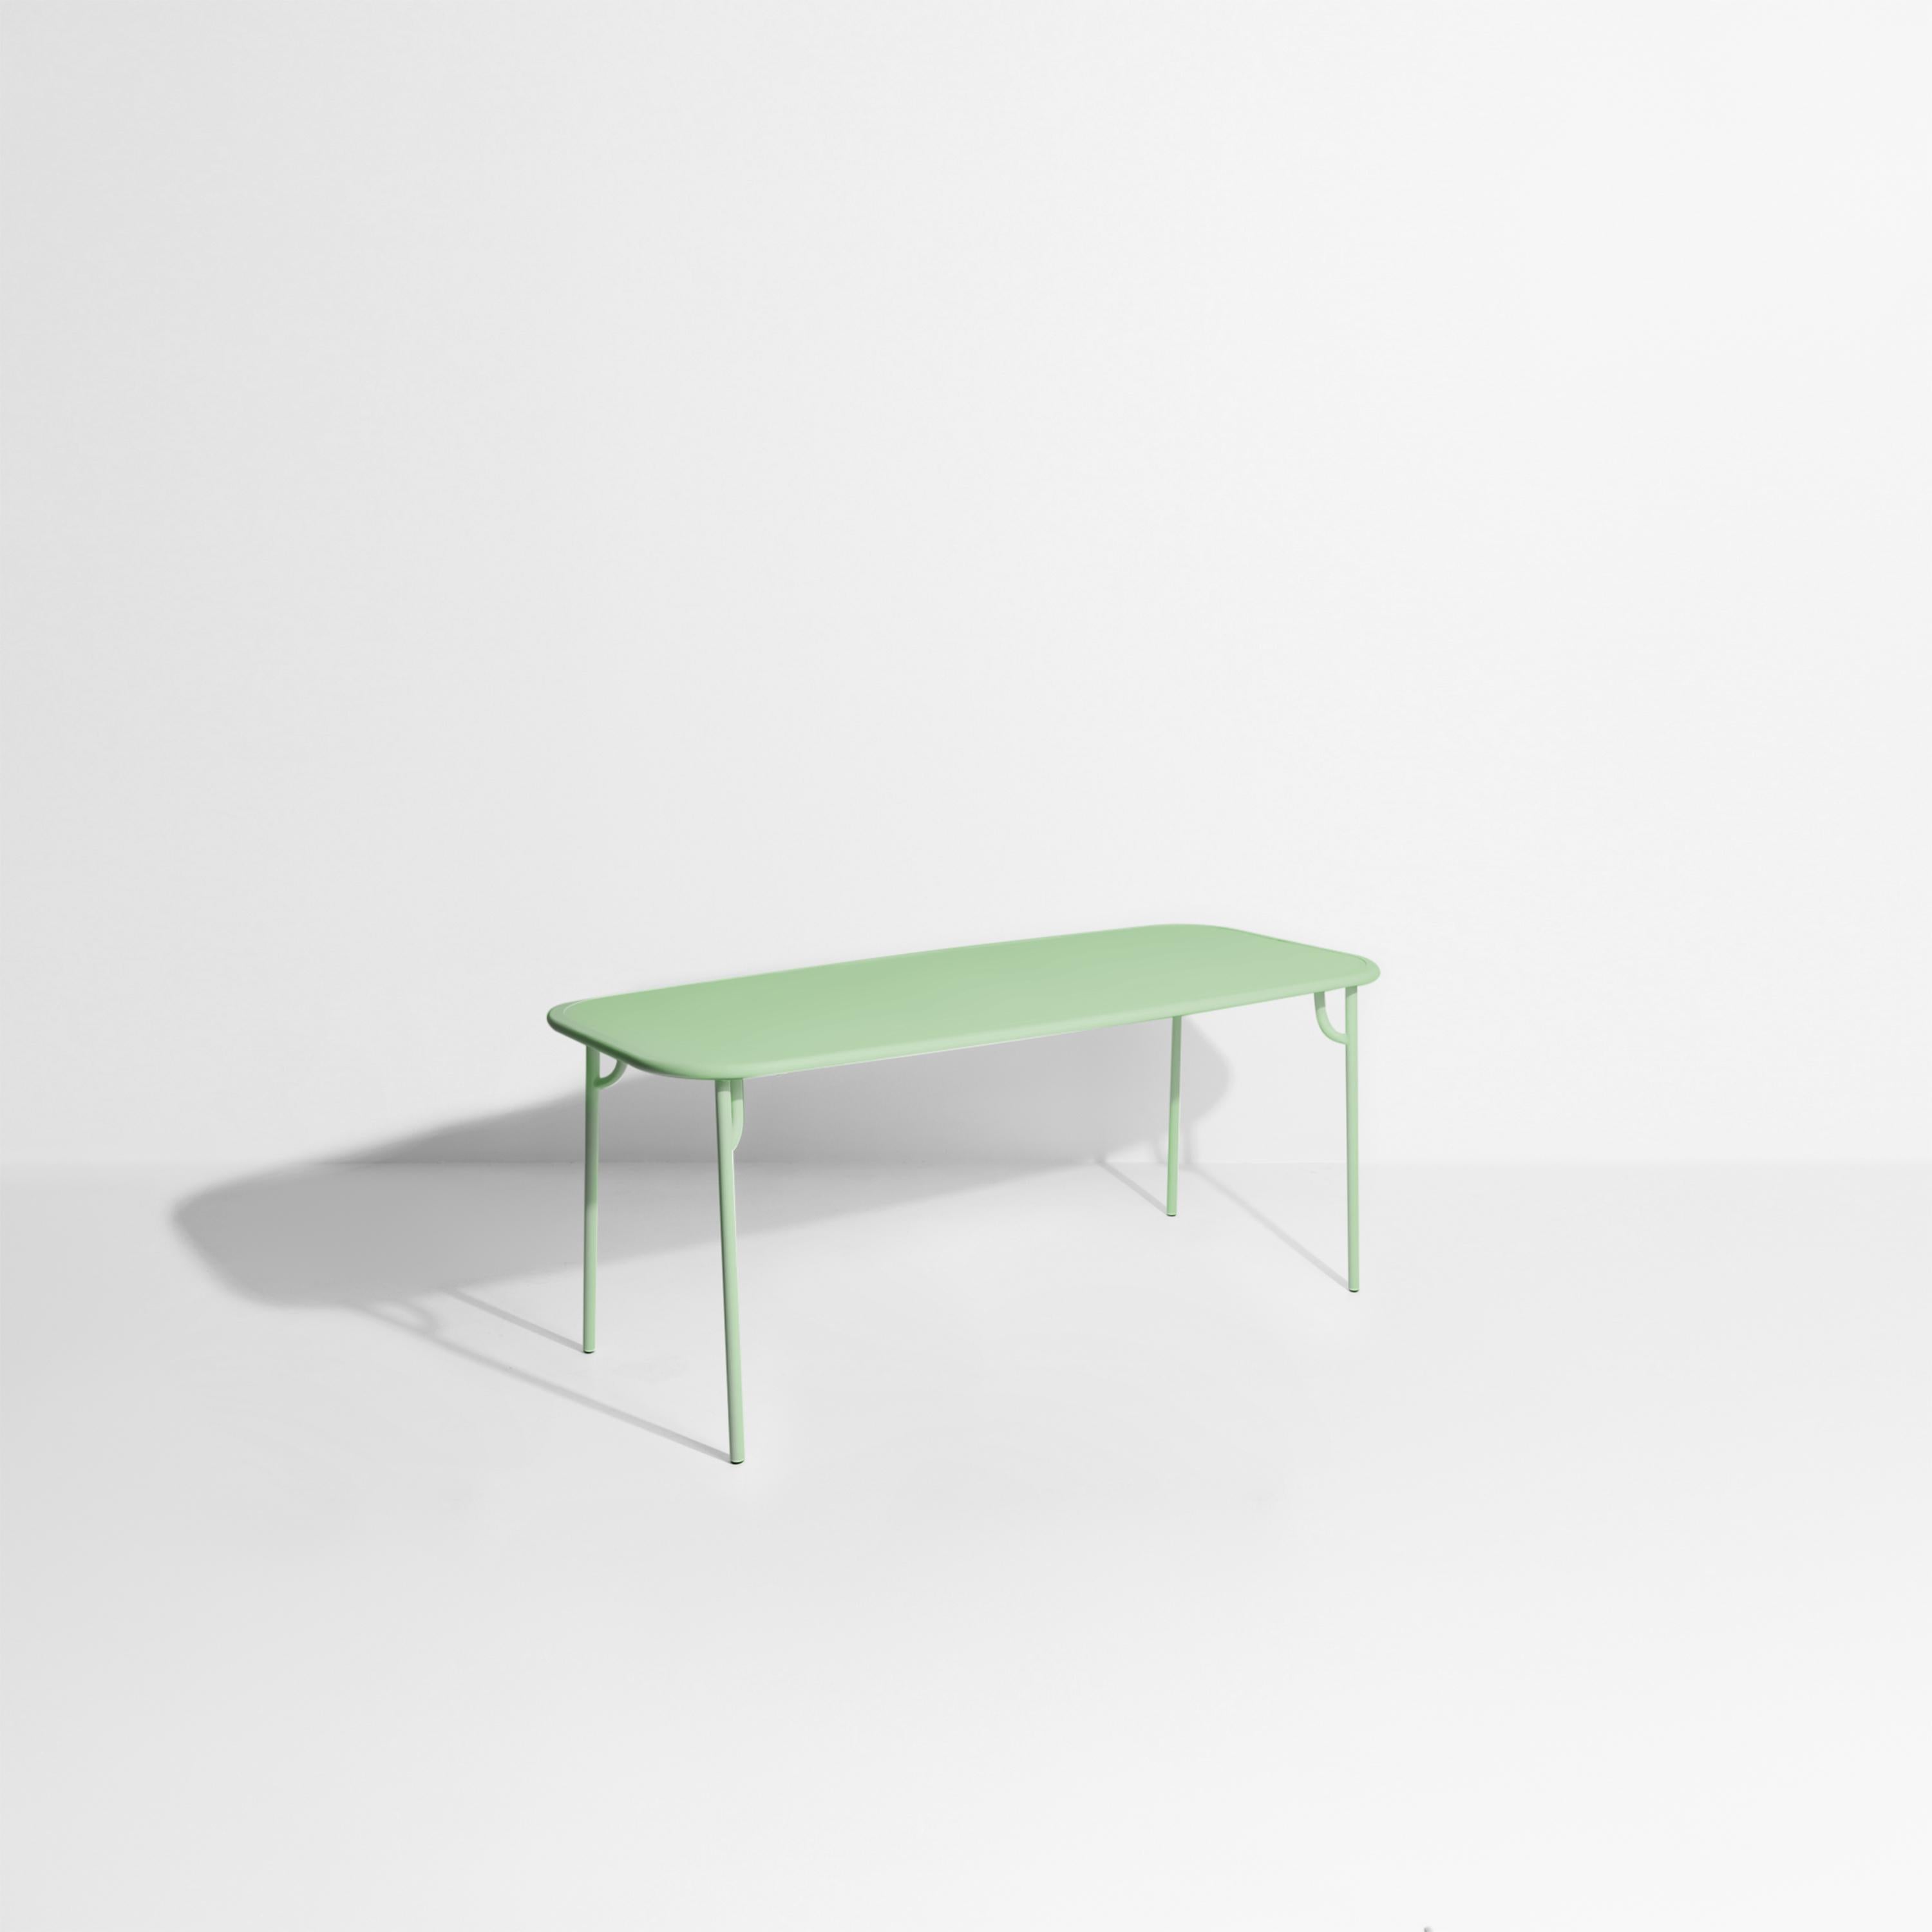 Petite Friture Week-End Medium Plain Rectangular Dining Table in Pastel Green Aluminium by Studio BrichetZiegler, 2017

The week-end collection is a full range of outdoor furniture, in aluminium grained epoxy paint, matt finish, that includes 18